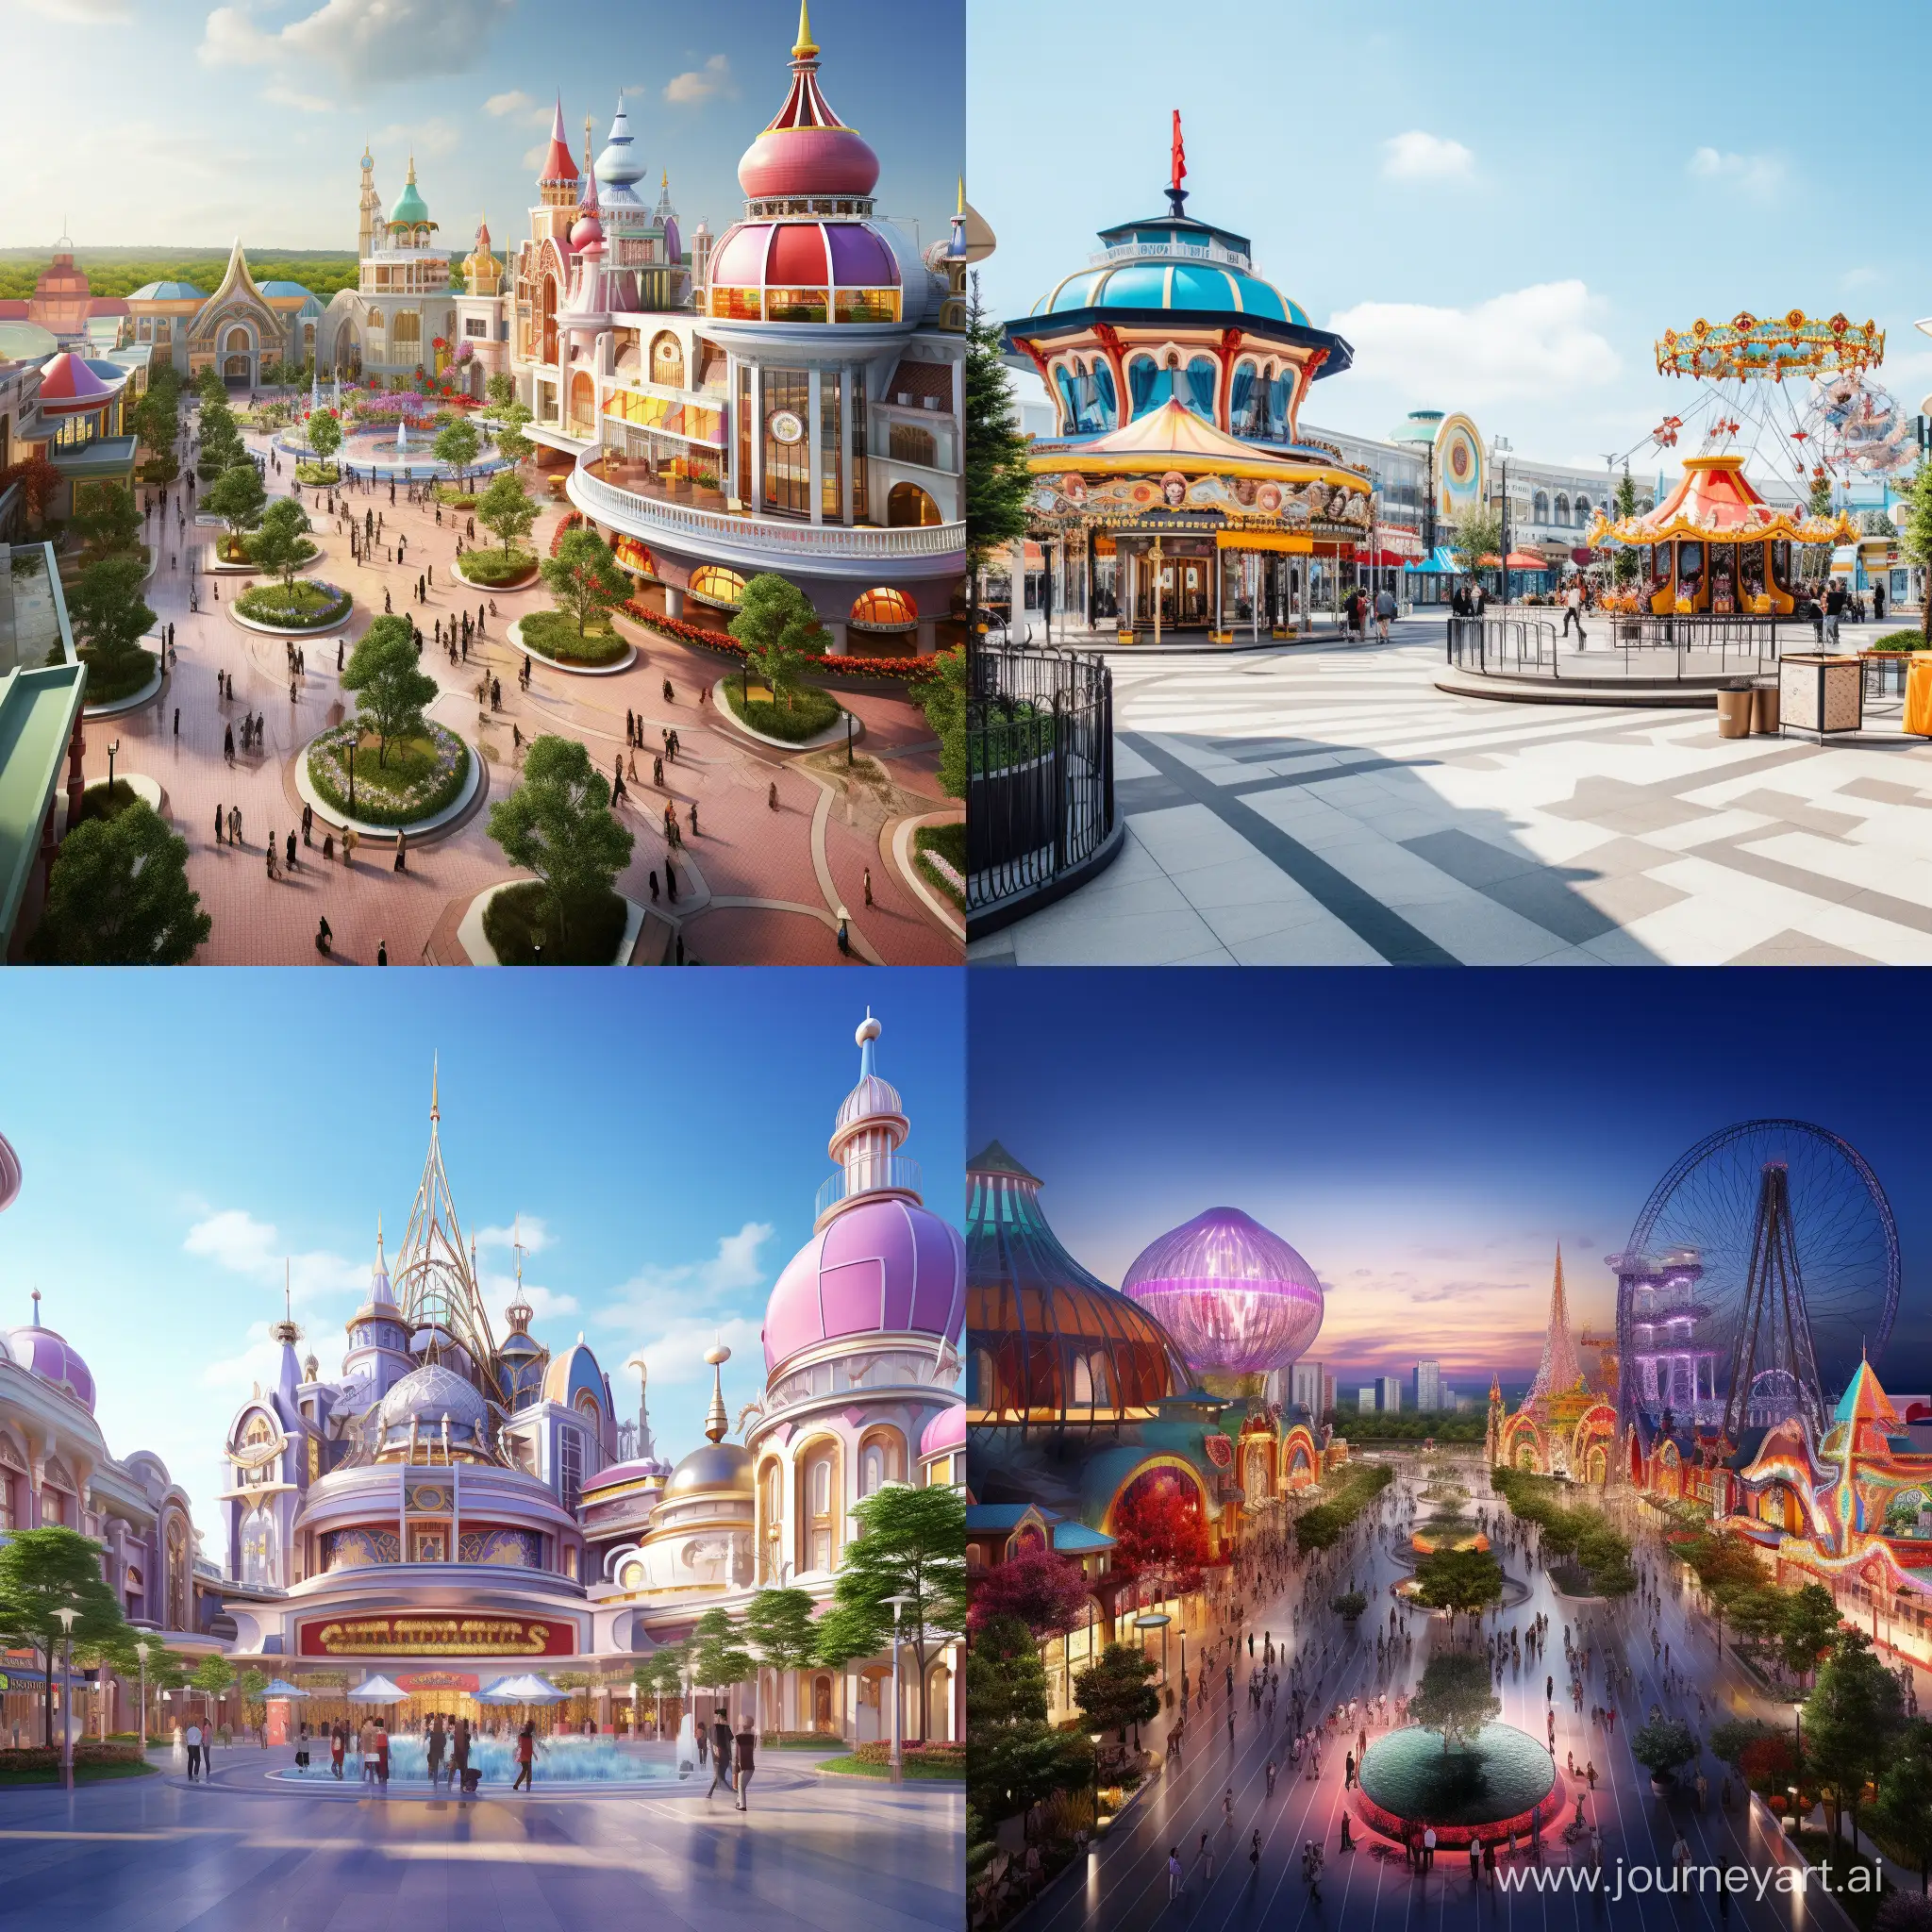 Vibrant-Amusement-Park-with-Carousel-Modern-Hotel-and-Colorful-Shops